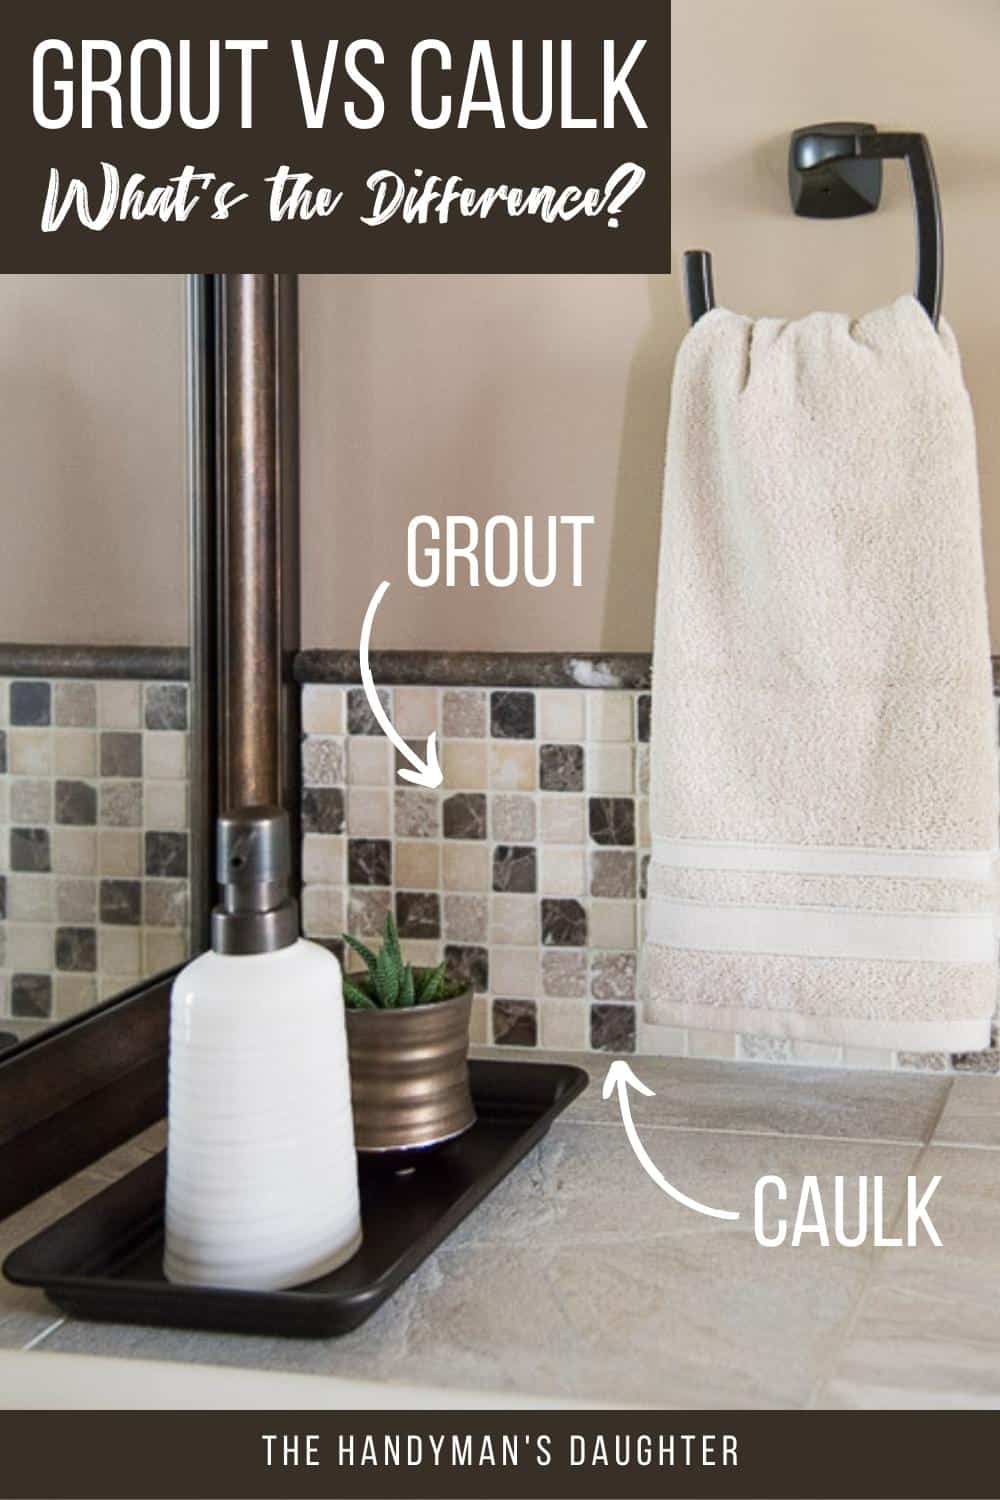 grout vs caulk - what's the difference?